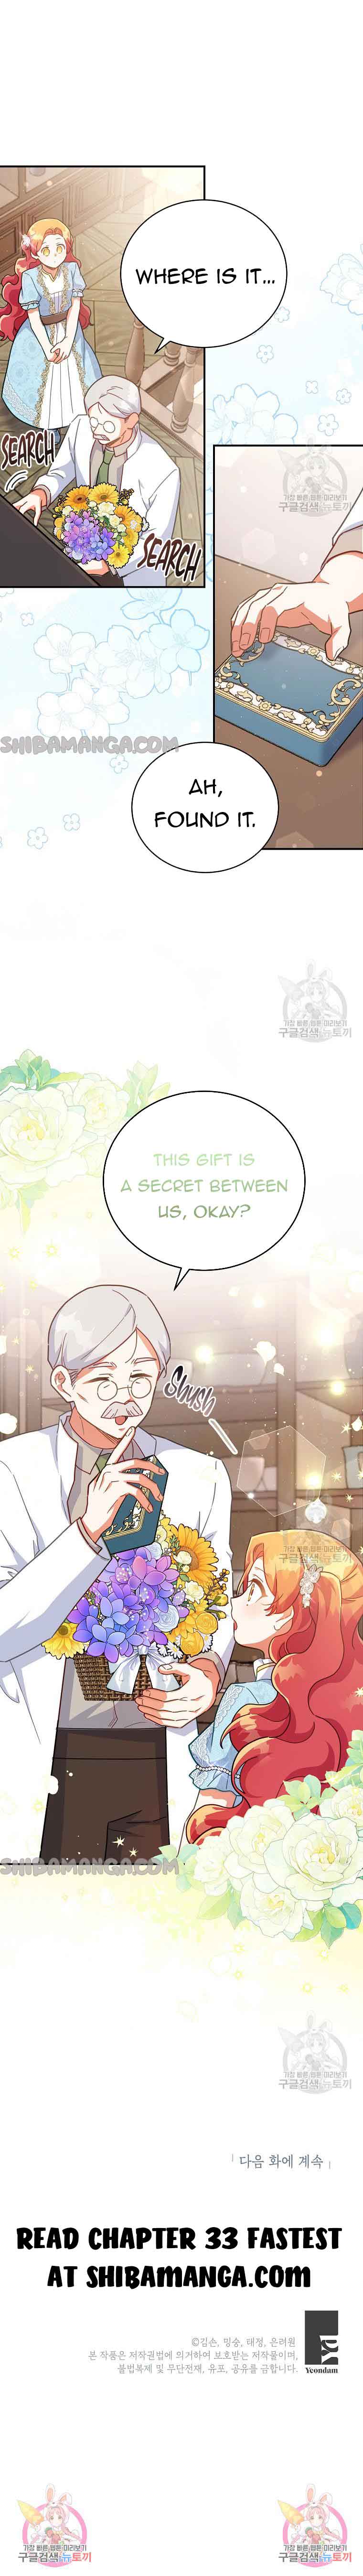 The Little Lord Who Makes Flowers Bloom chapter 32